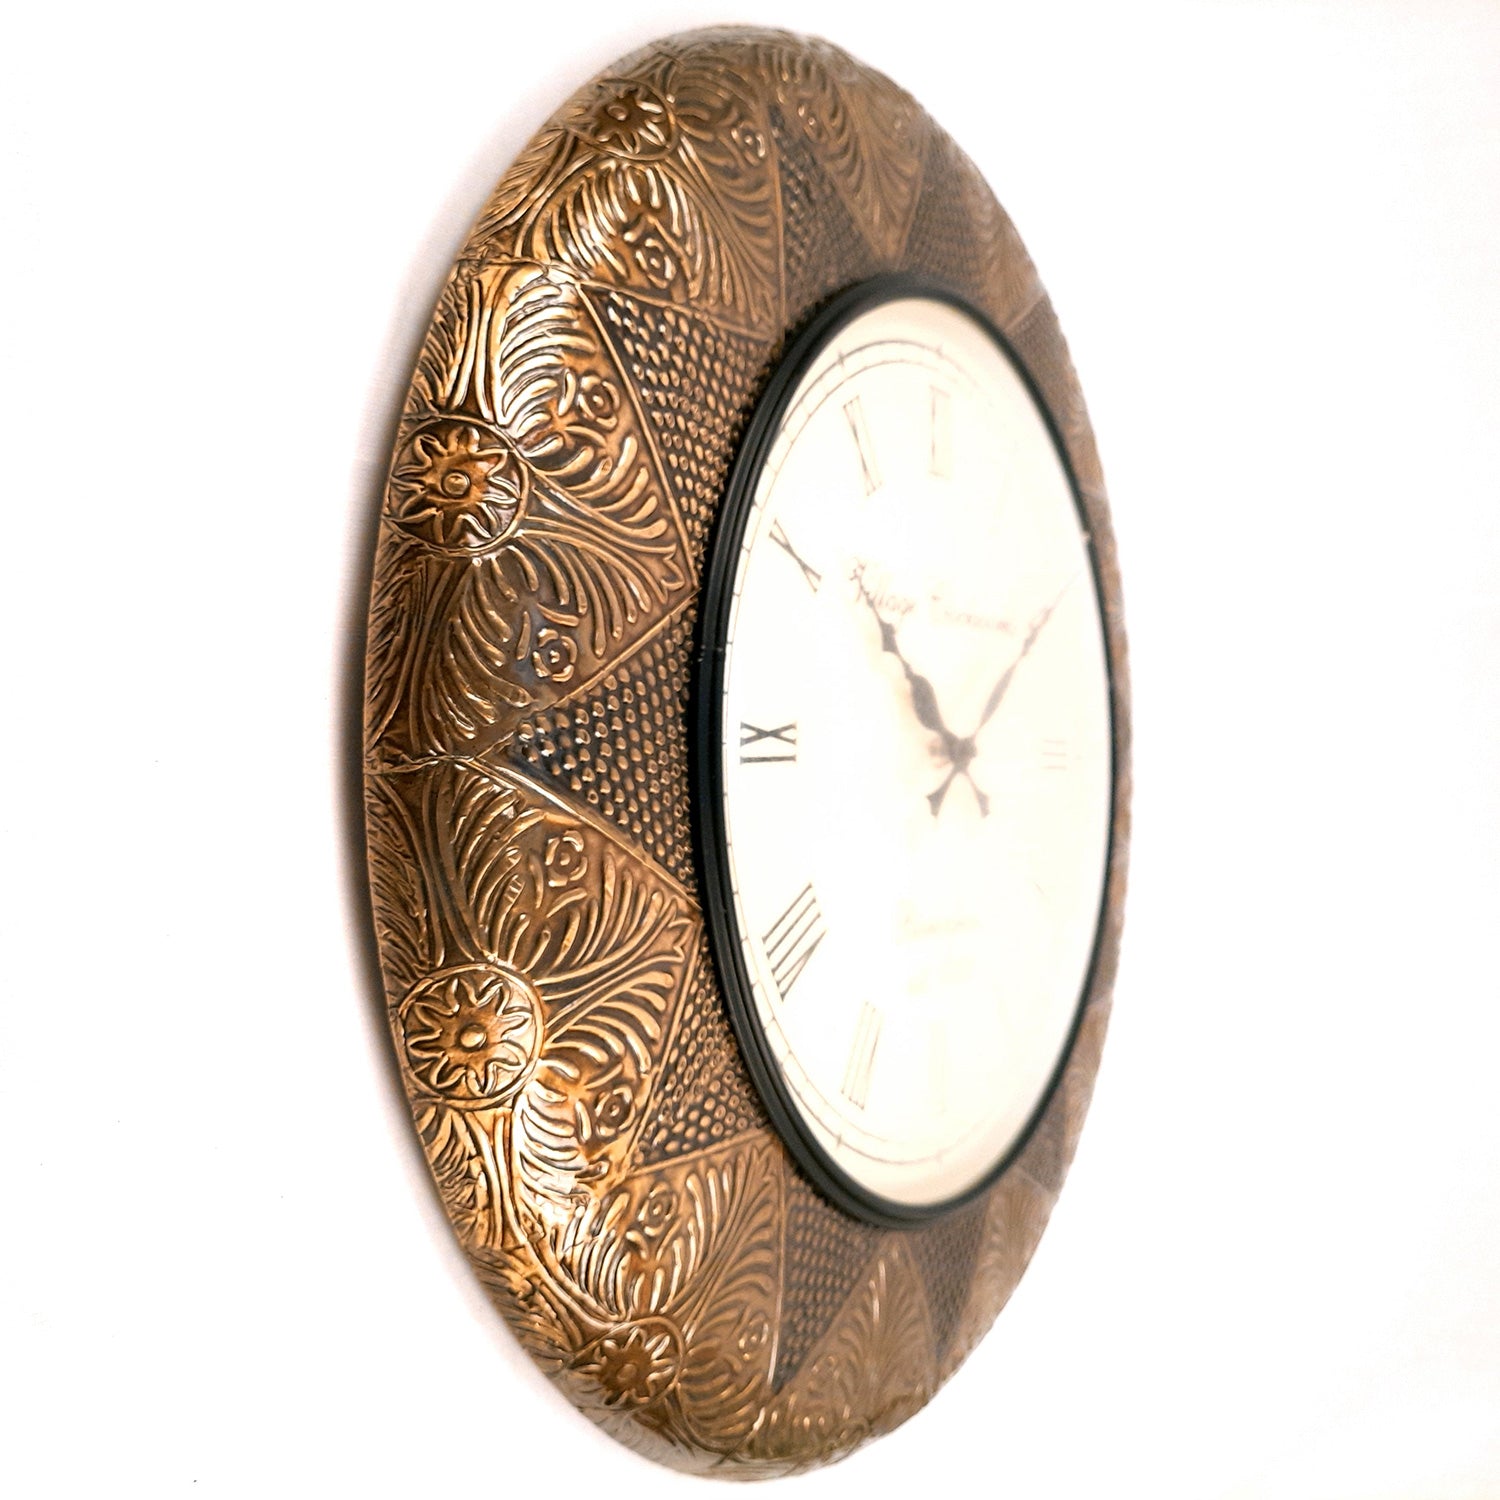 Wall Clock Vintage for Living Room | Wall Mount Clock With Antique Brass Work - For Home, Office, Bedroom, Hall Decor & Gifts | Wedding & Housewarming Gift - 18 Inch